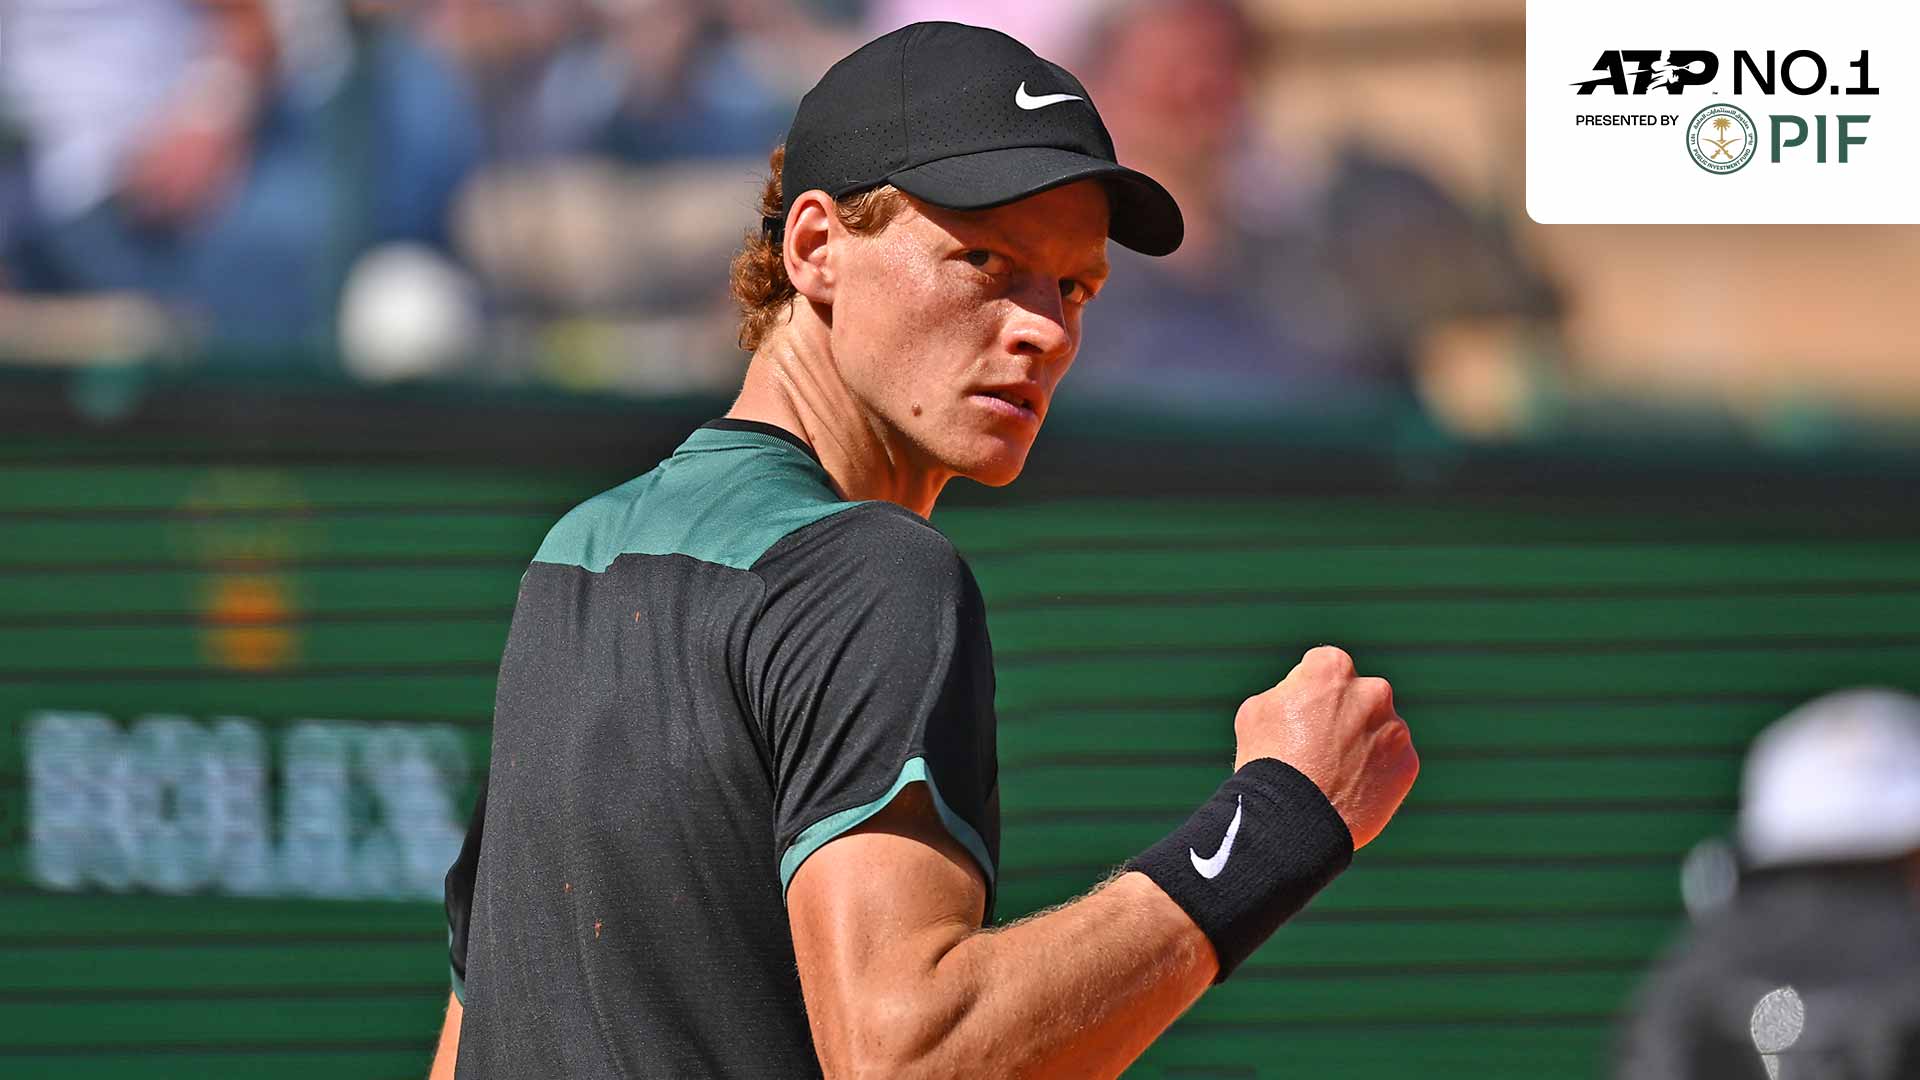 Jannik Sinner became the first Italian to reach No. 1 in the PIF ATP Rankings.